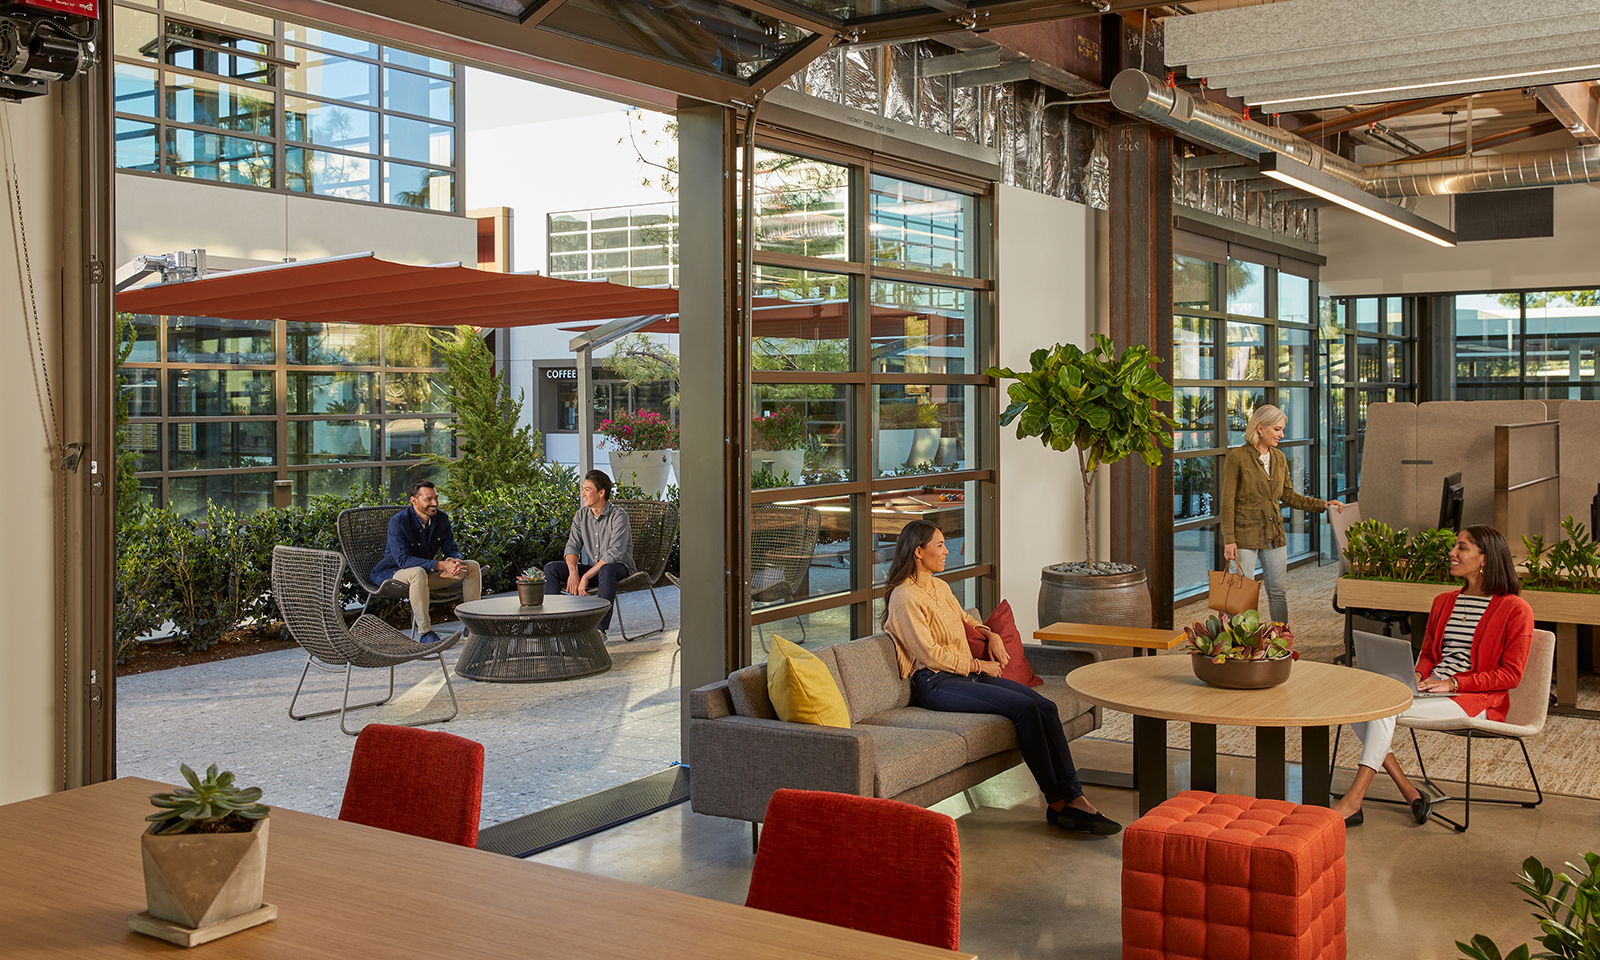 Irvine Company creates the first open-air office village designed for health and wellness